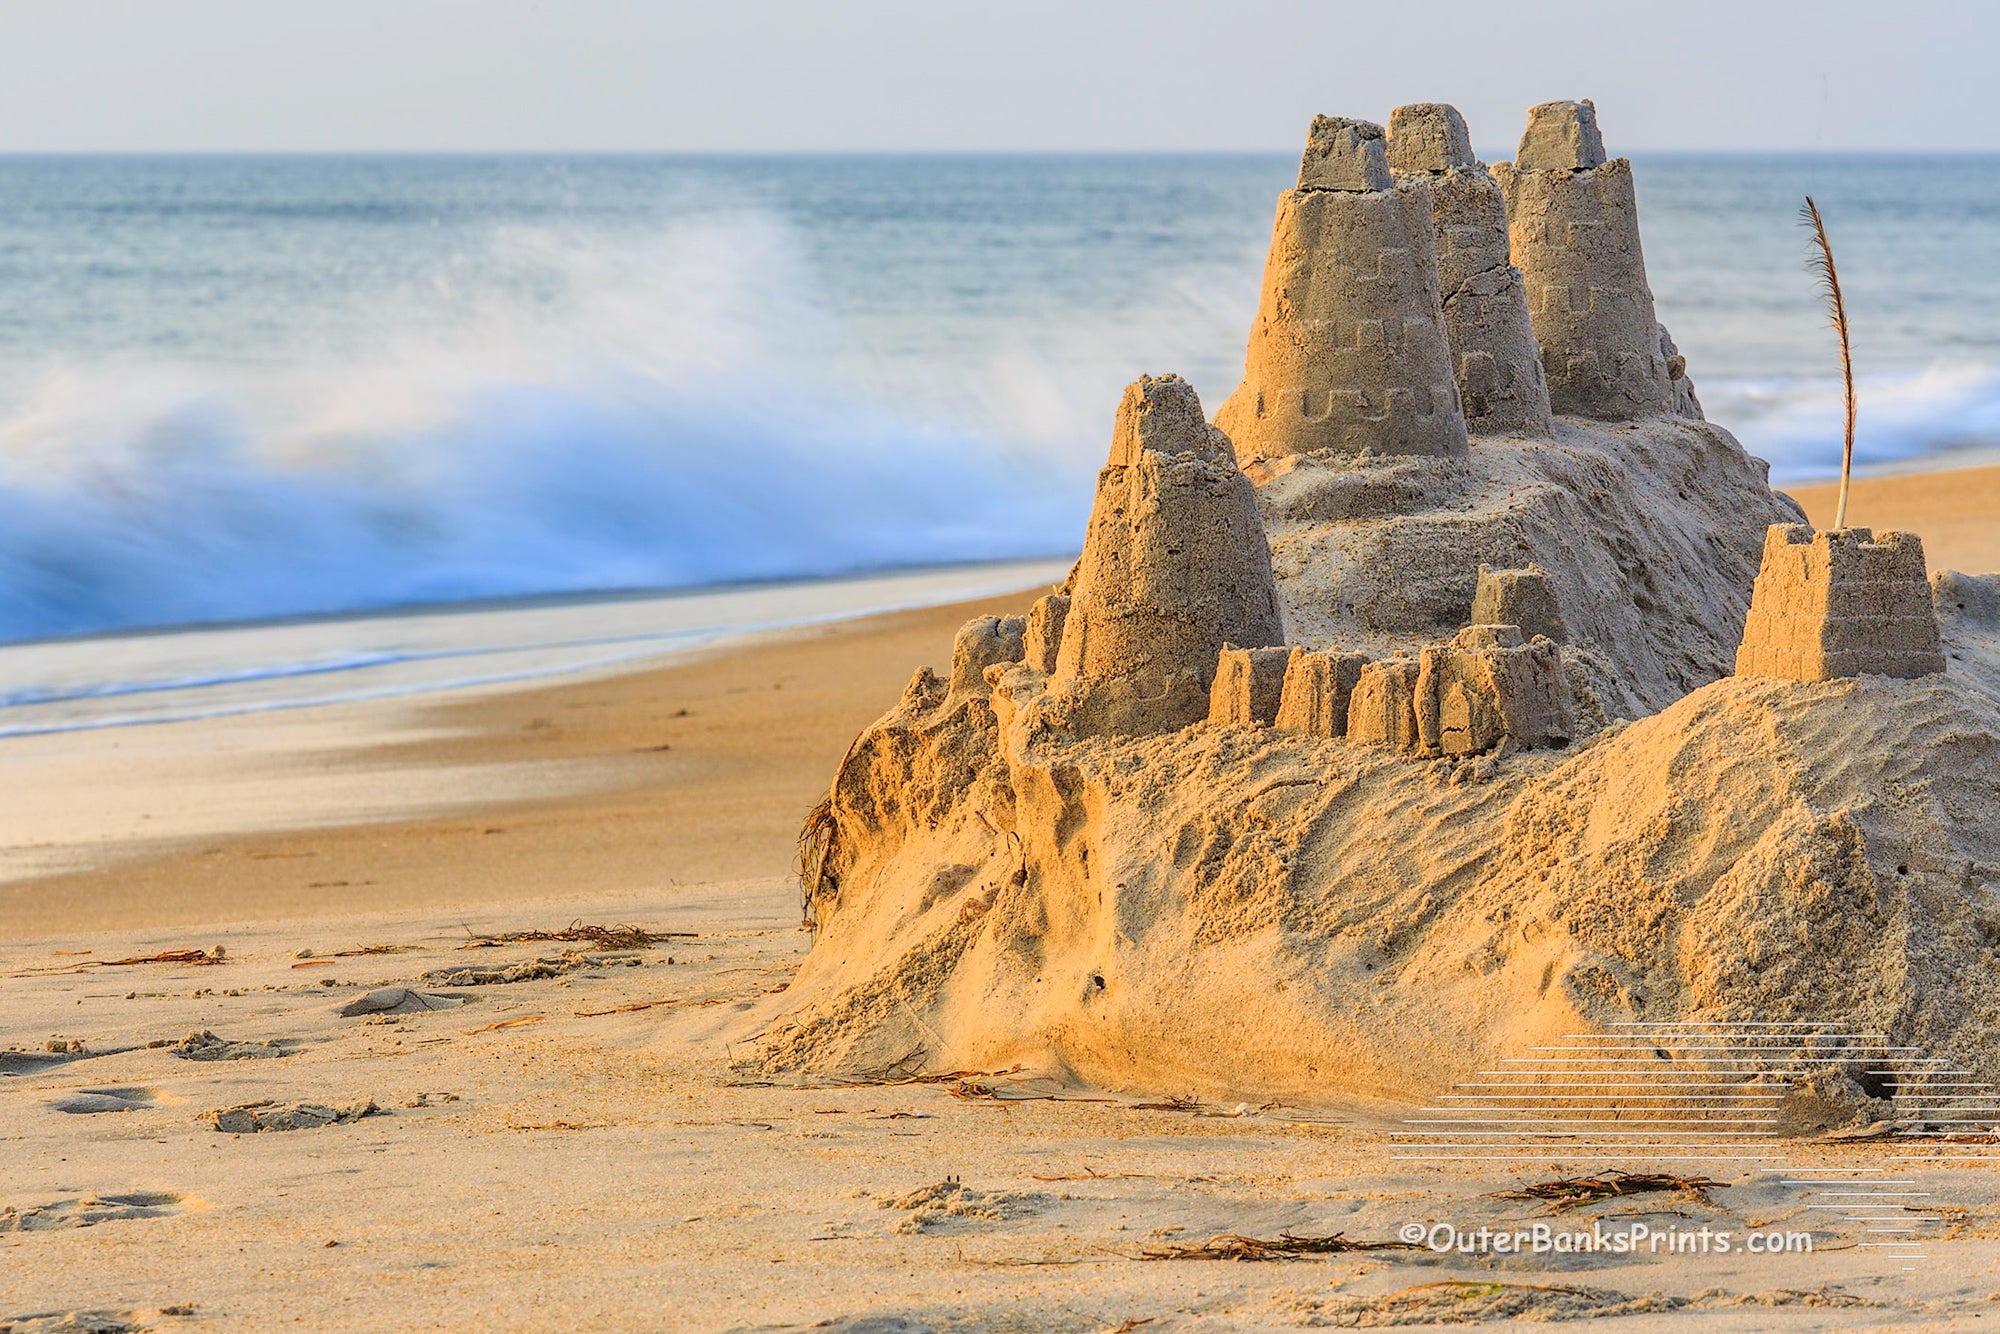 The high tide close ing in on this sand castle in Duck, NC.